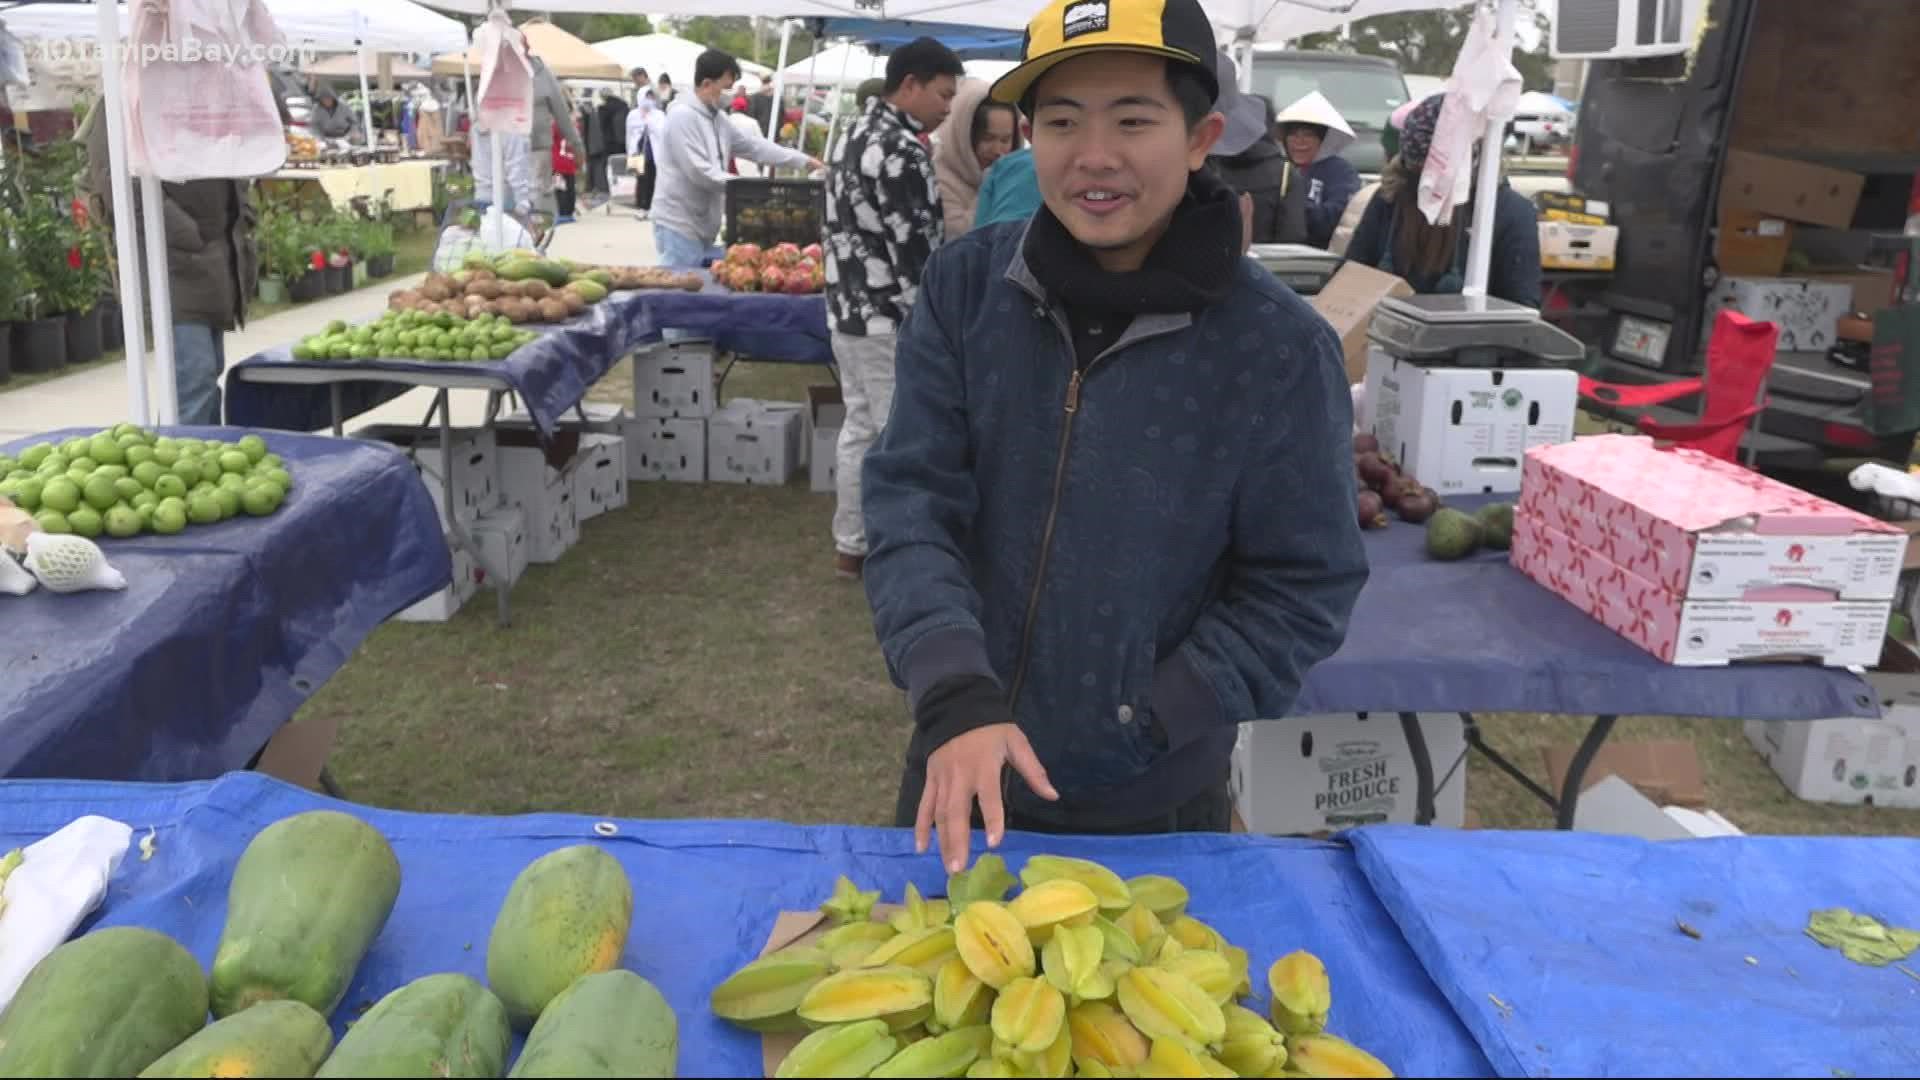 The collection of various vendors and local produce growers work together to share rich Asian culture with Tampa Bay.